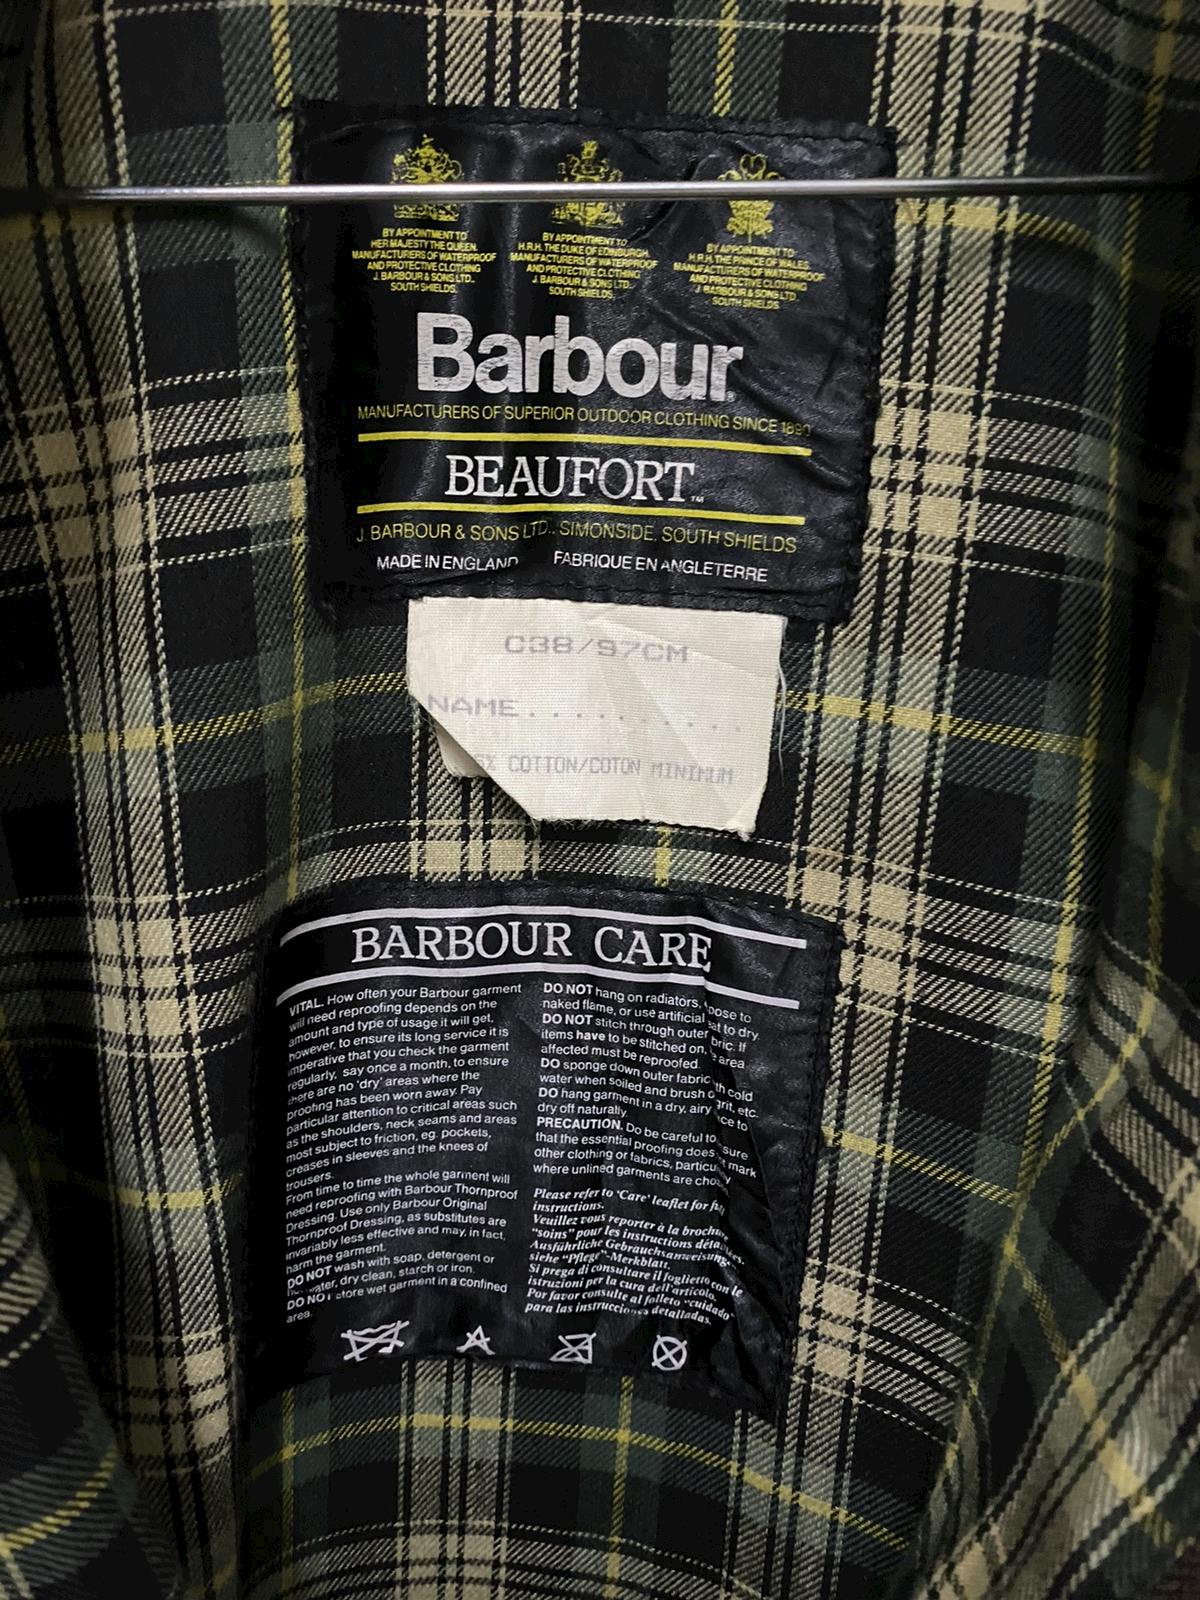 Vintage Barbour A150 Beaufort Wax Jacket Made in England - 10